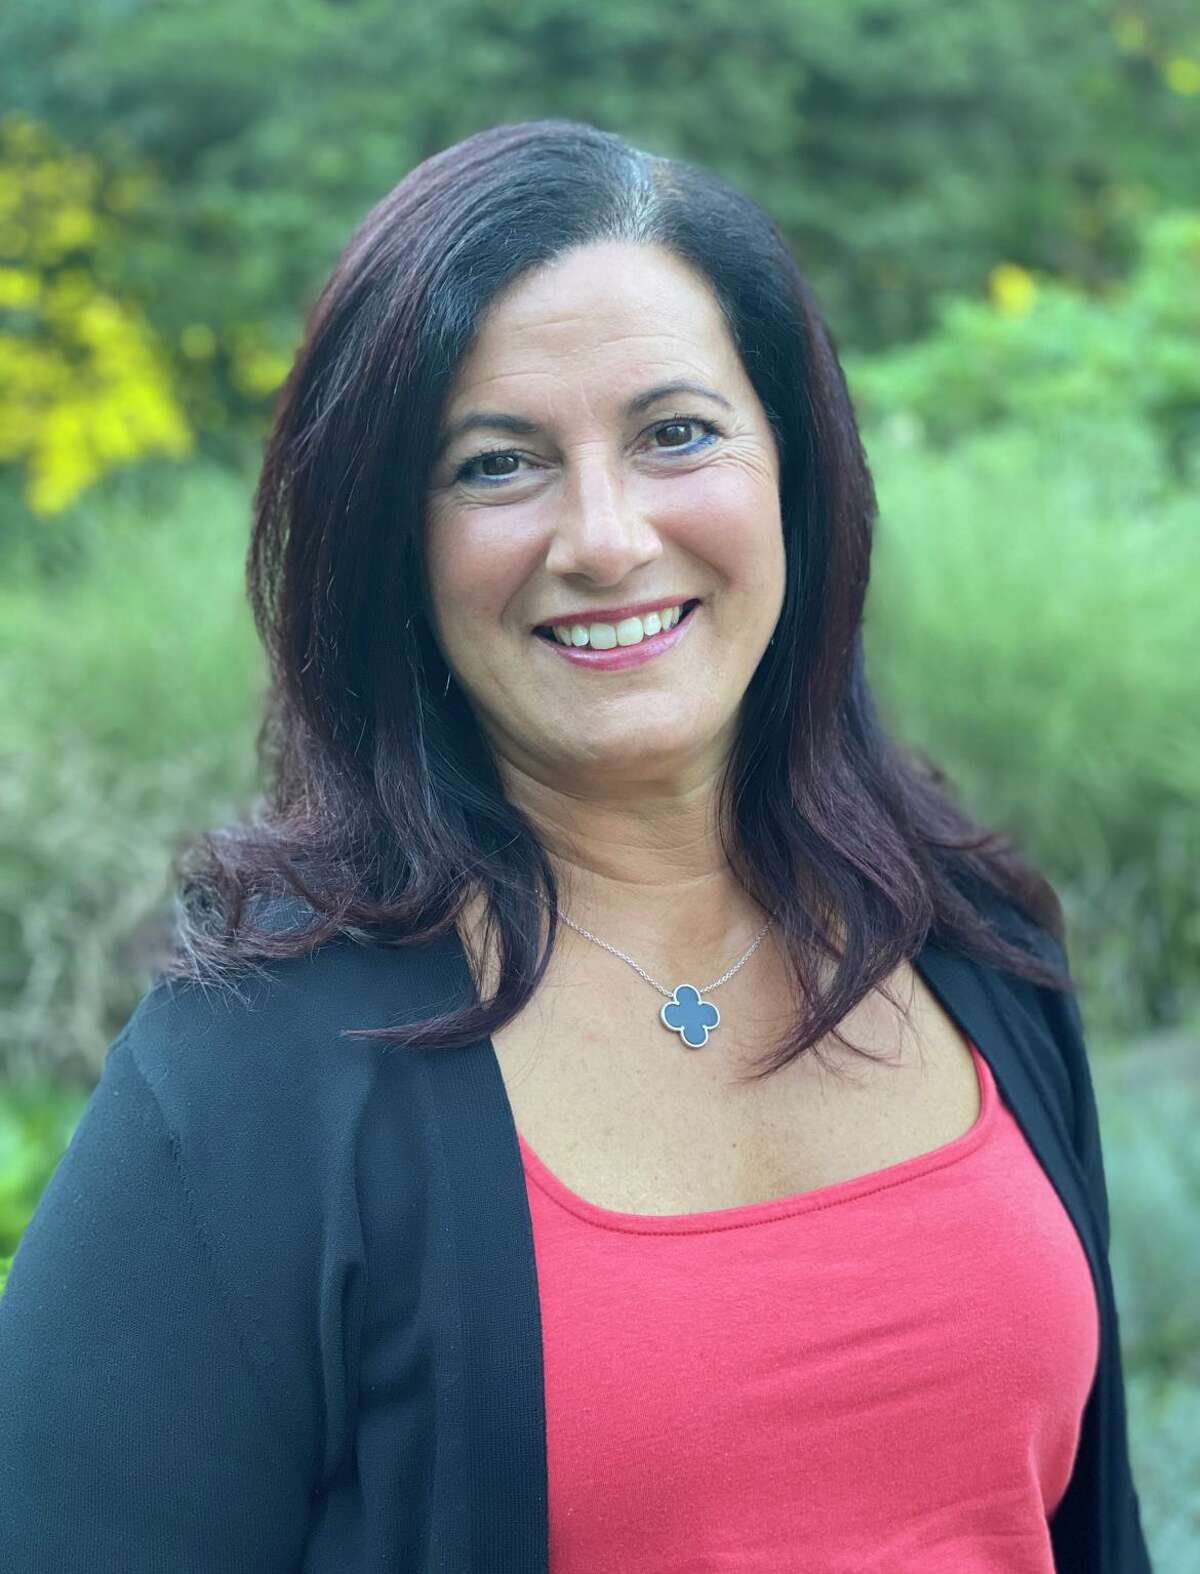 The Center Stage Theatre in Shelton has announced the appointment of Carla Supersano Sullivan as the theatre’s Managing Director, bringing theatre, philanthropic and community experience to the organization. Sullivan is pictured.